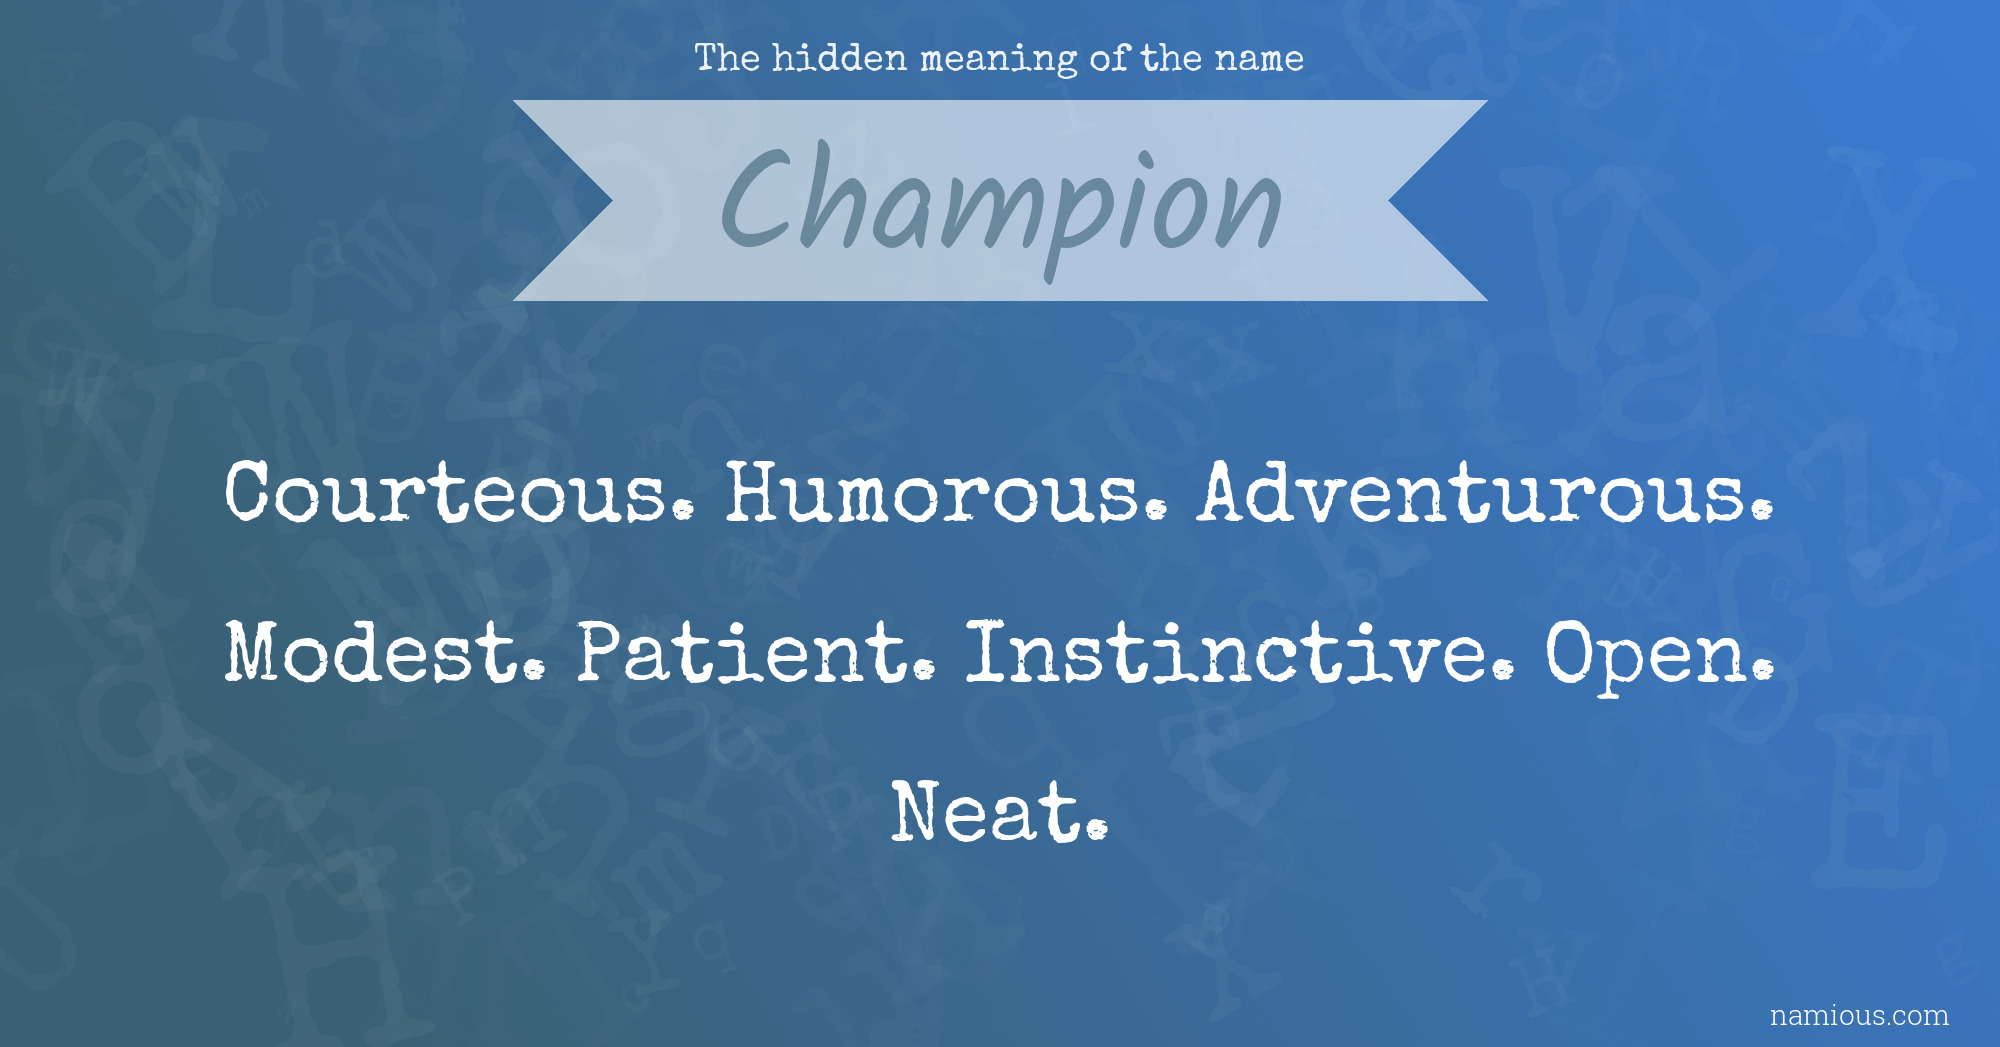 The meaning of the name Champion | Namious